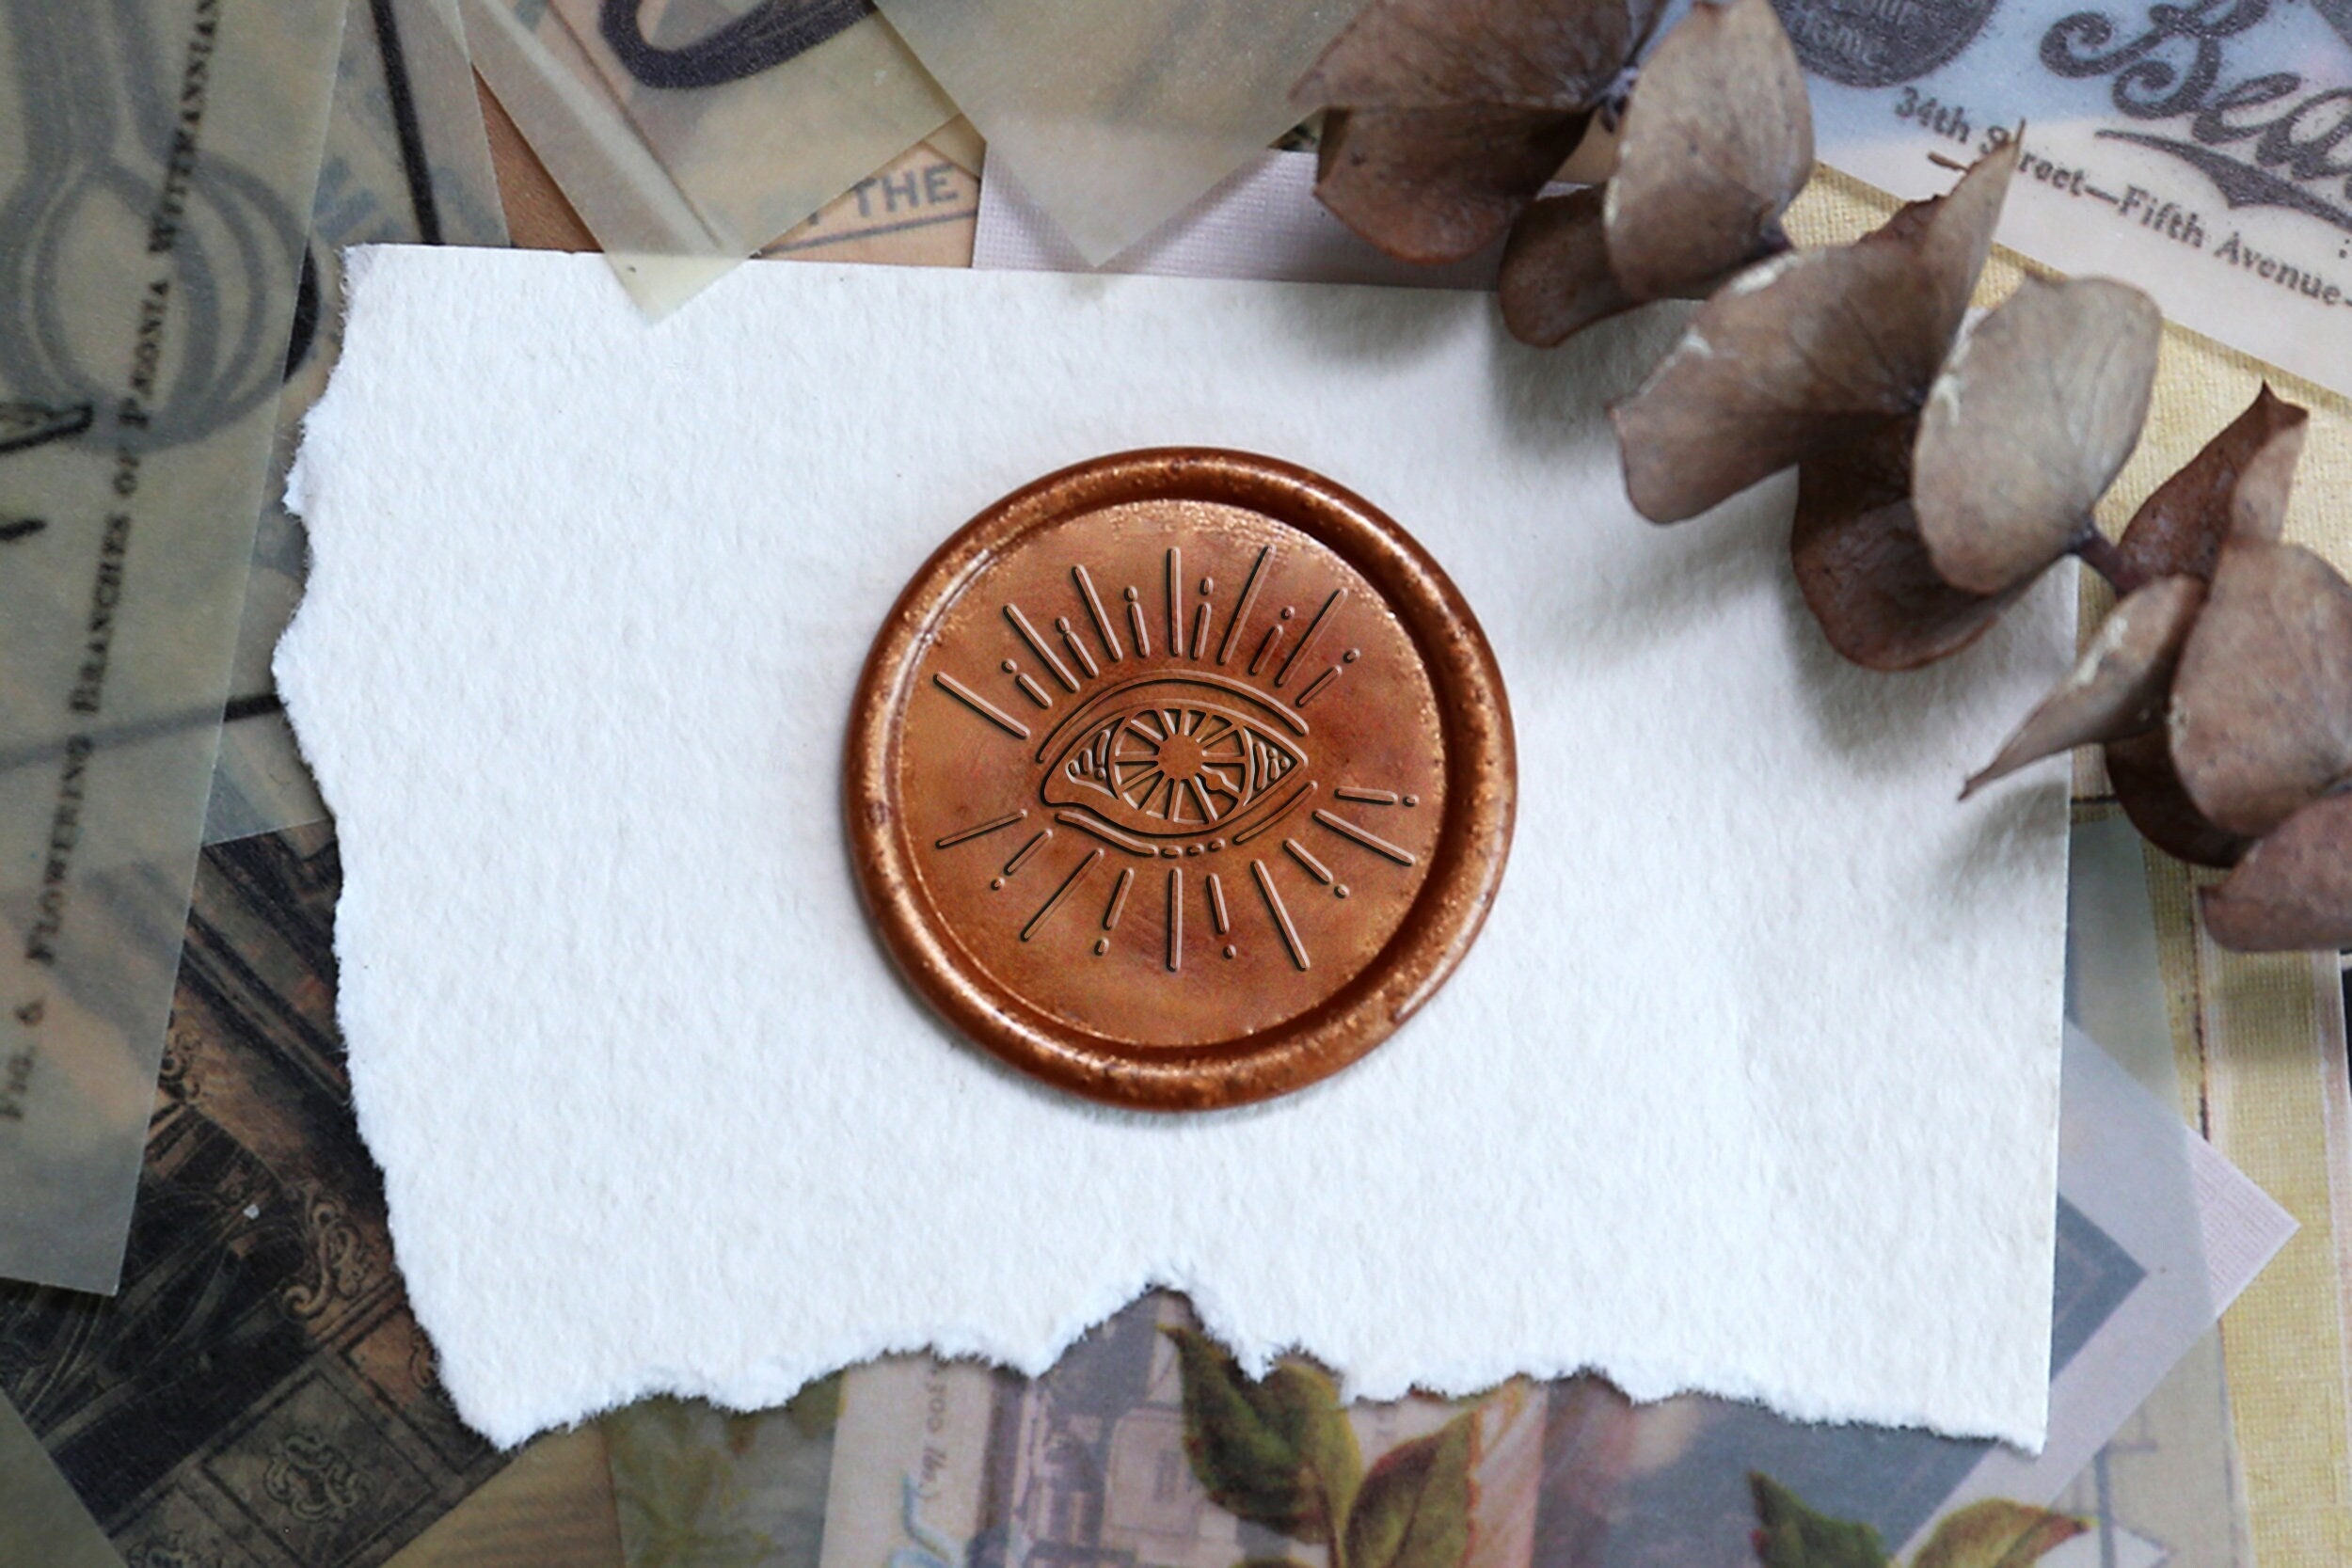 Eye of Providence Metal Wax Stamp Head, Wax Seal Head, Magical Wax, Wax  Seal Stamp, Craft Supplies, Stamp to Seal Envelopes 